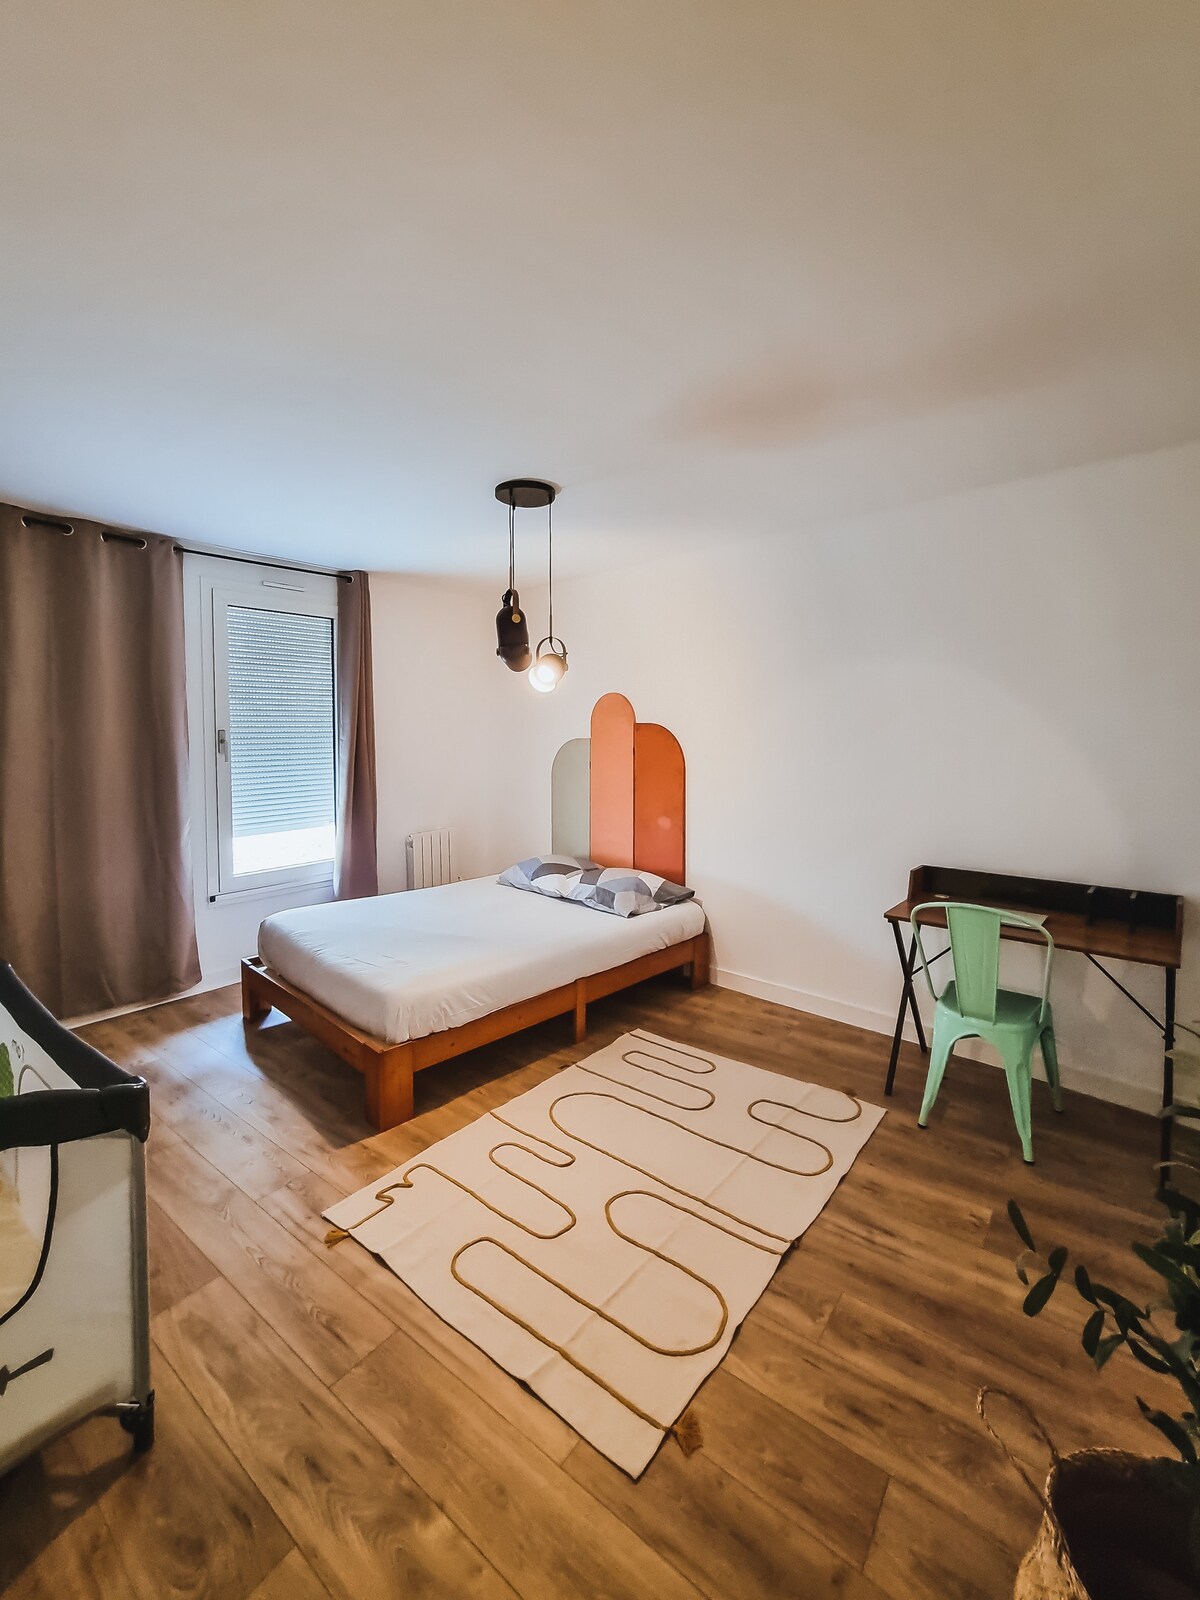 Troyes City center rue zola : Space and Comfort